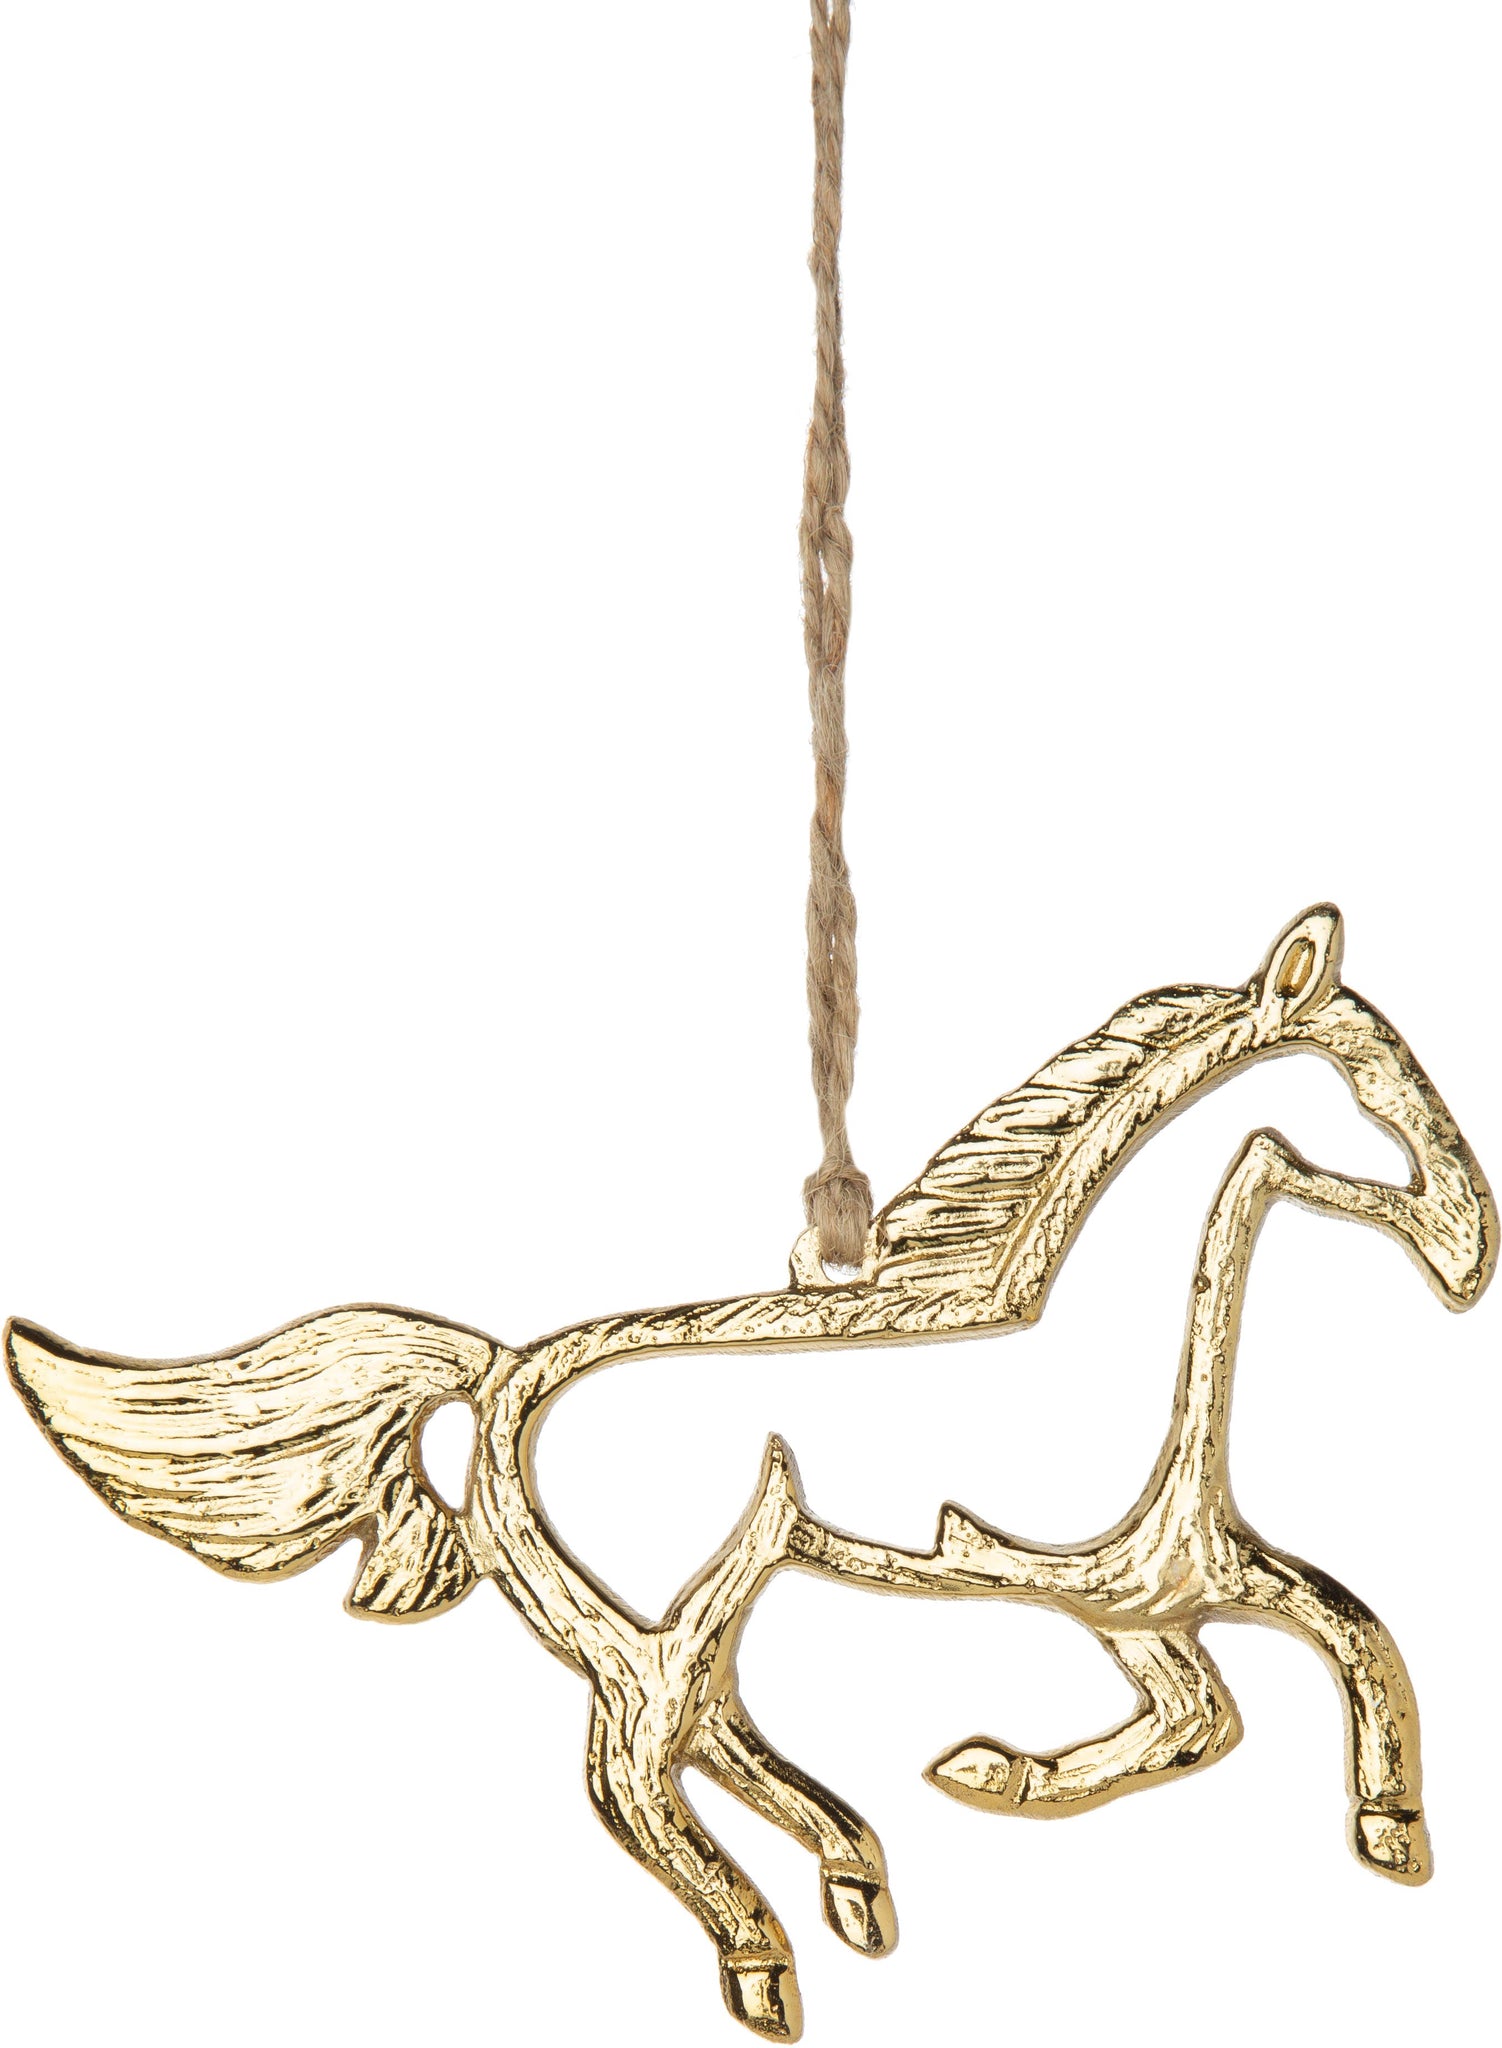 Silver Tree Holiday Ornament- A69008 Cast metal horse silhouette, gold tone plated finish